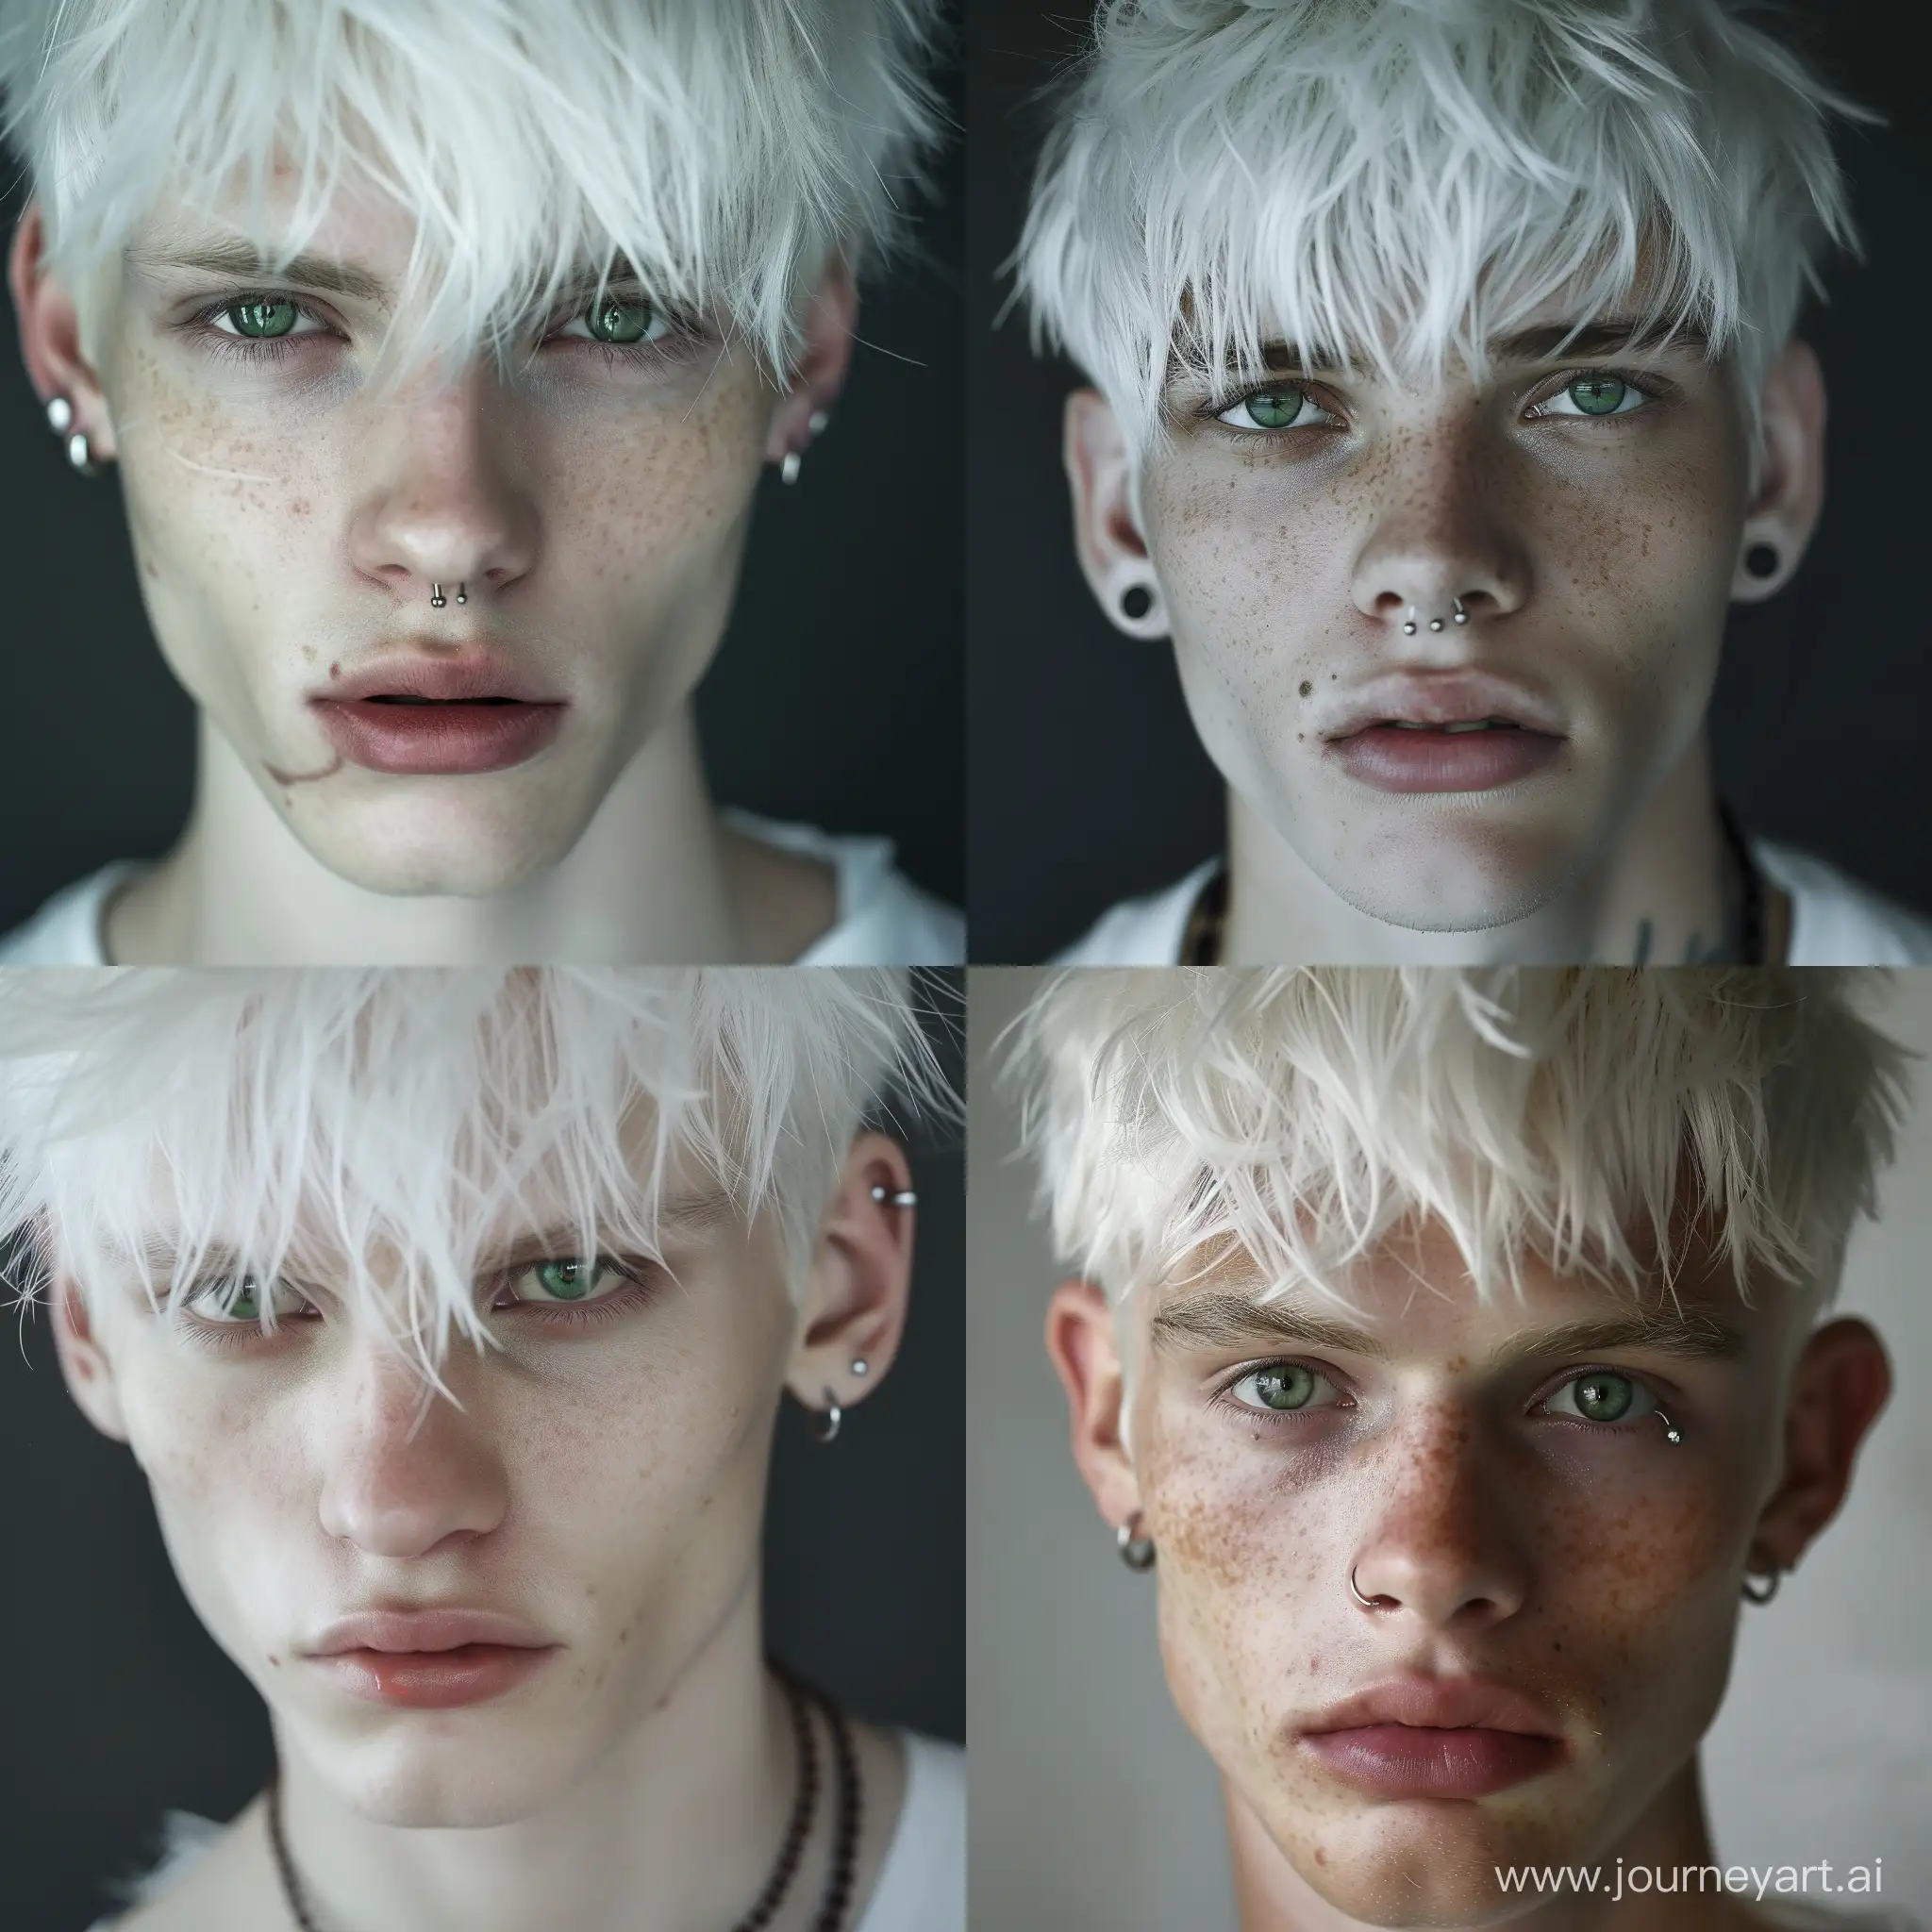 Expressionless-WhiteHaired-Man-with-Piercings-and-Pale-Skin